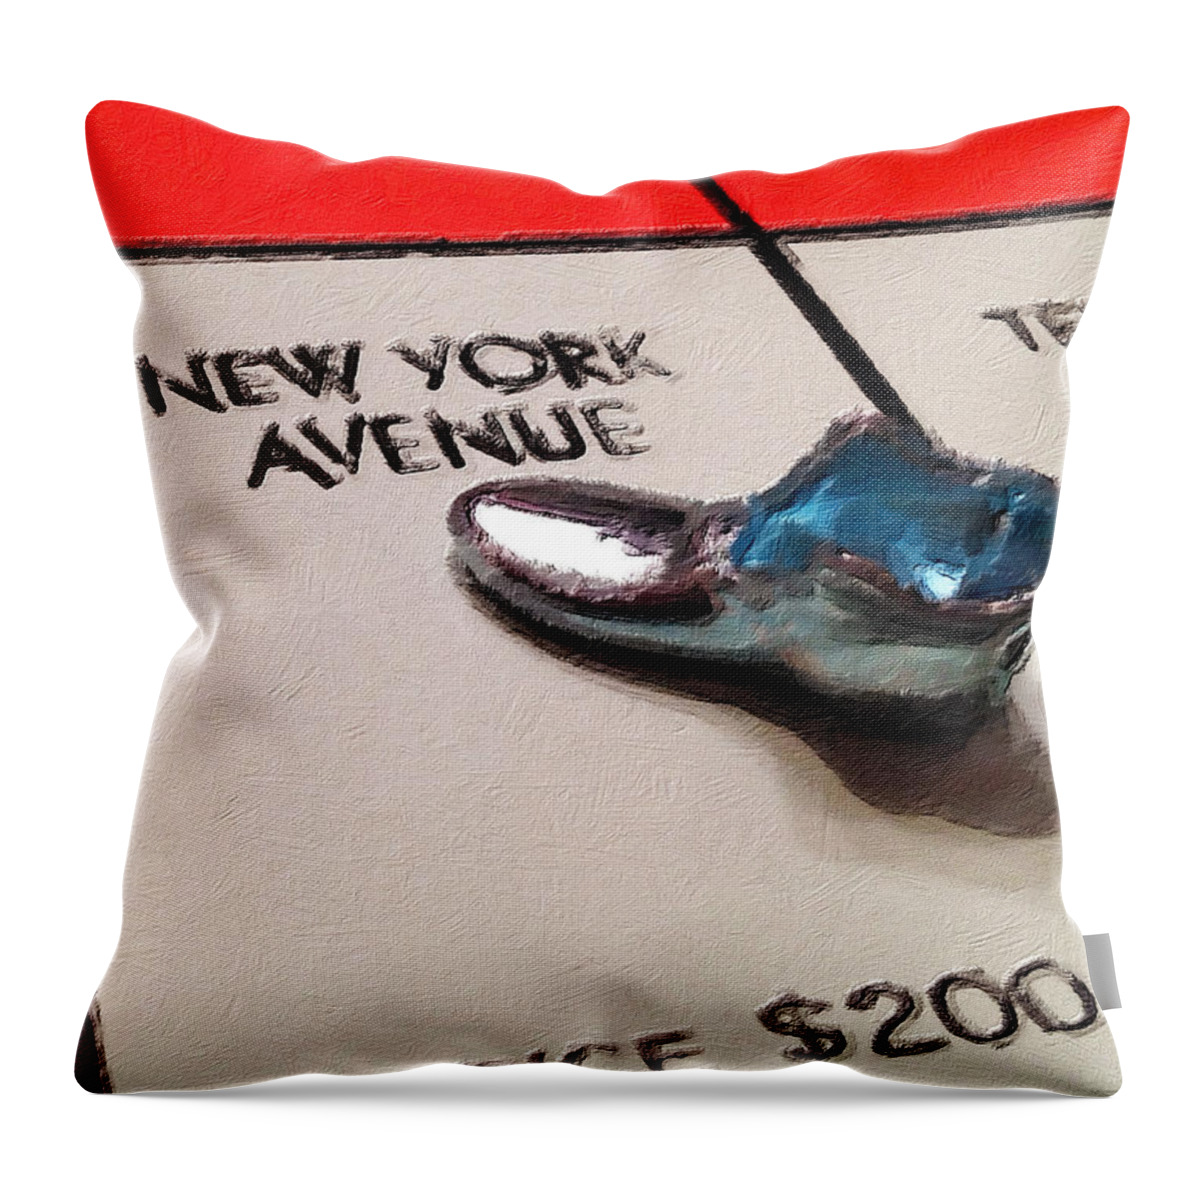 Monopoly Throw Pillow featuring the painting Monopoly Board Custom Painting New York Avenue by Tony Rubino